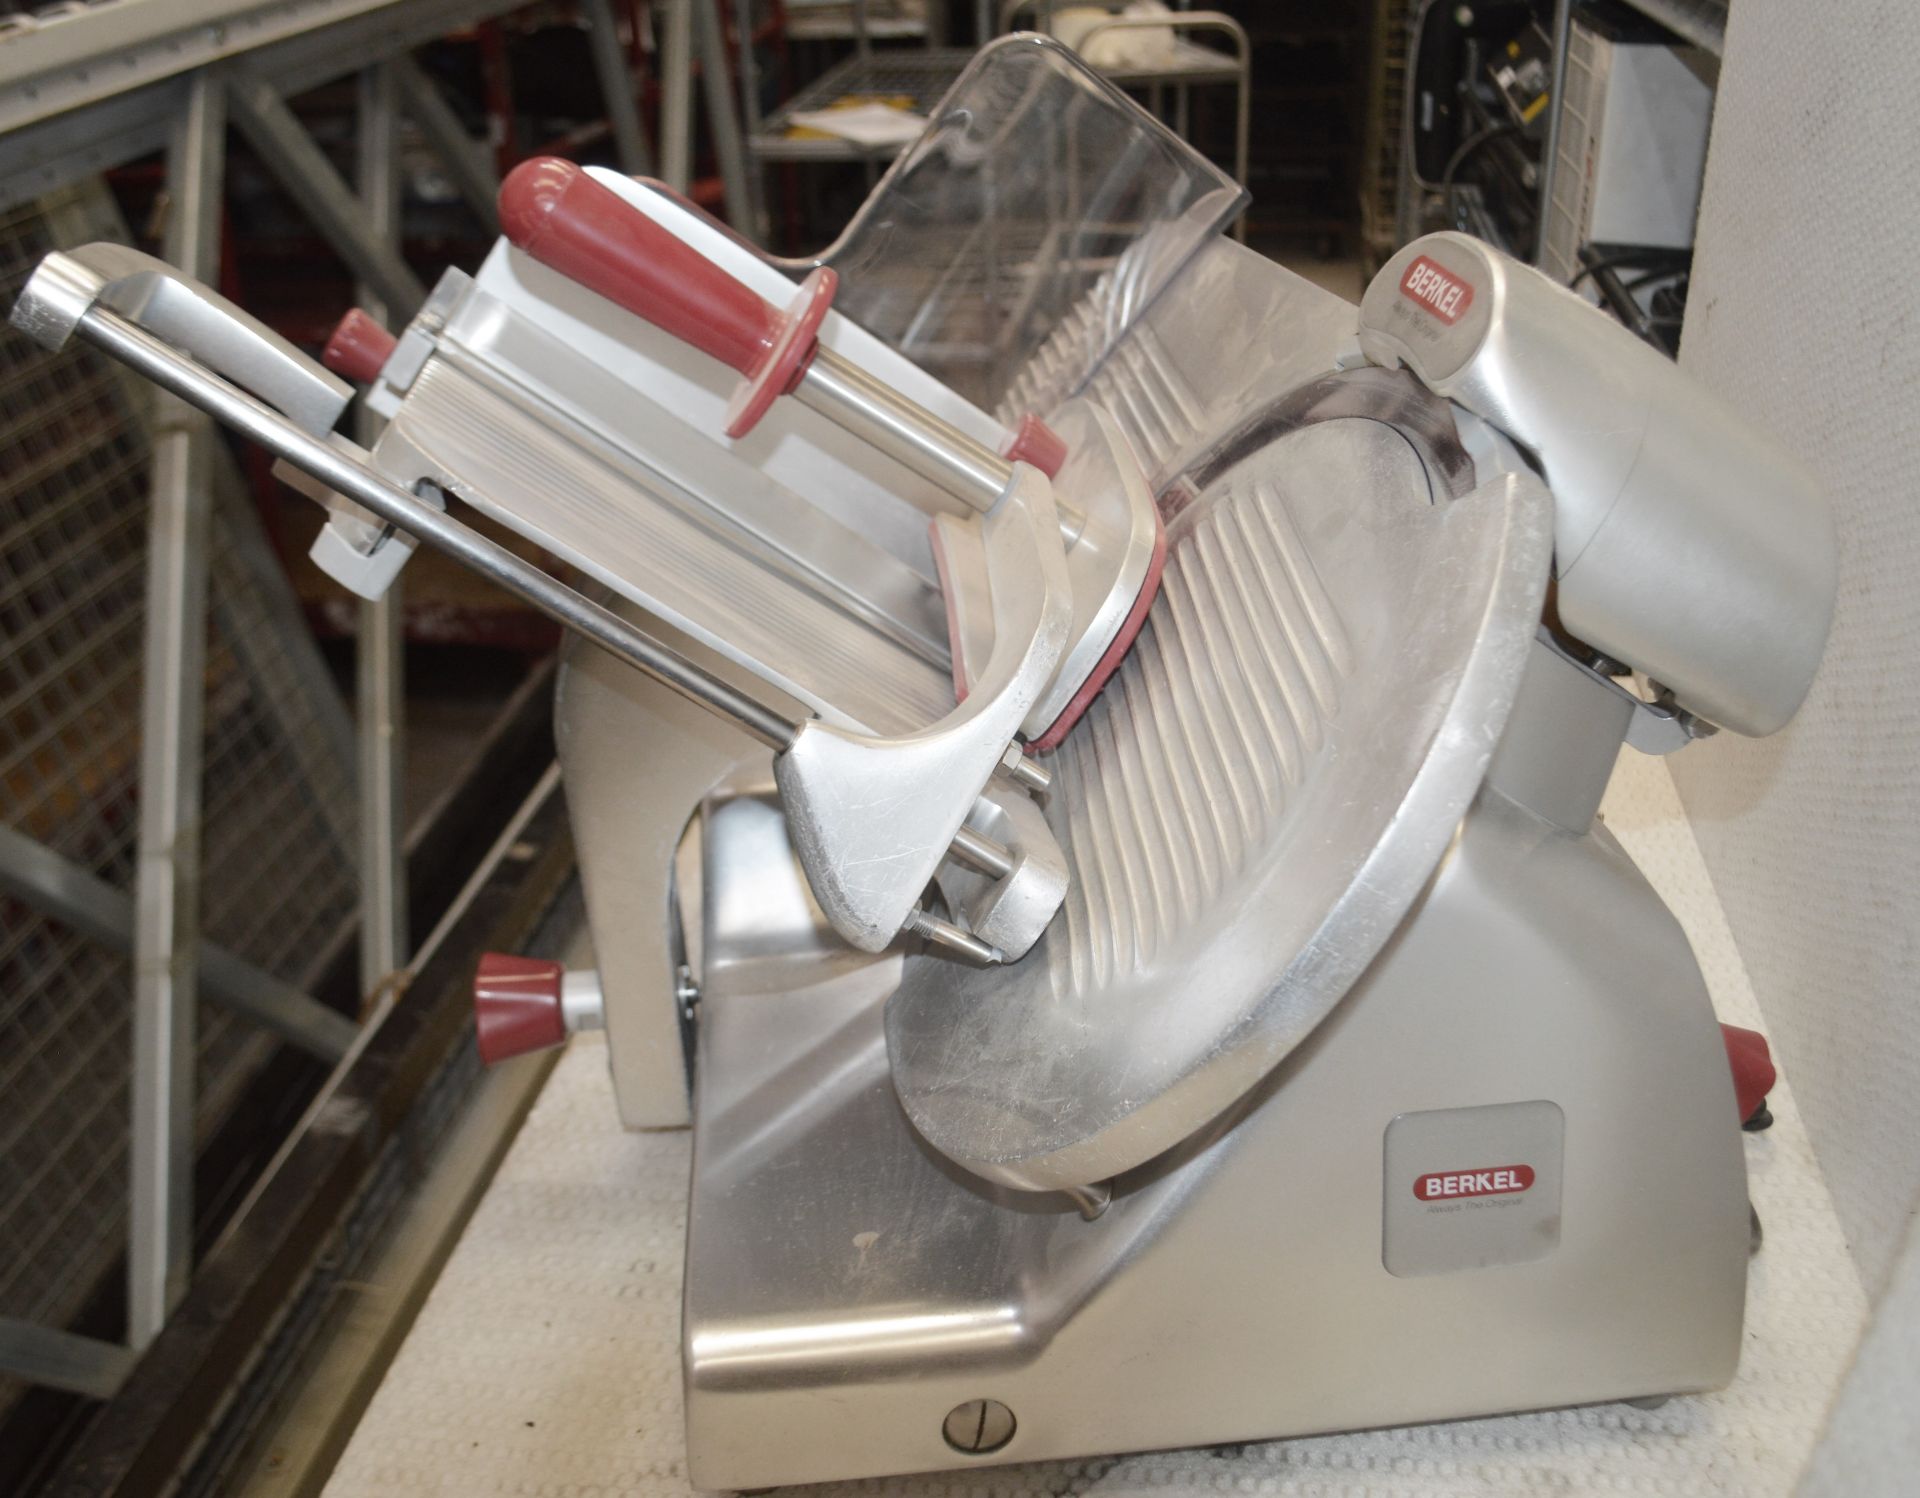 1 x Berkel 12" Commercial Cooked Meat / Bacon Slicer - 220-240v - Model BSPGL04011A0F - Approx - Image 4 of 4